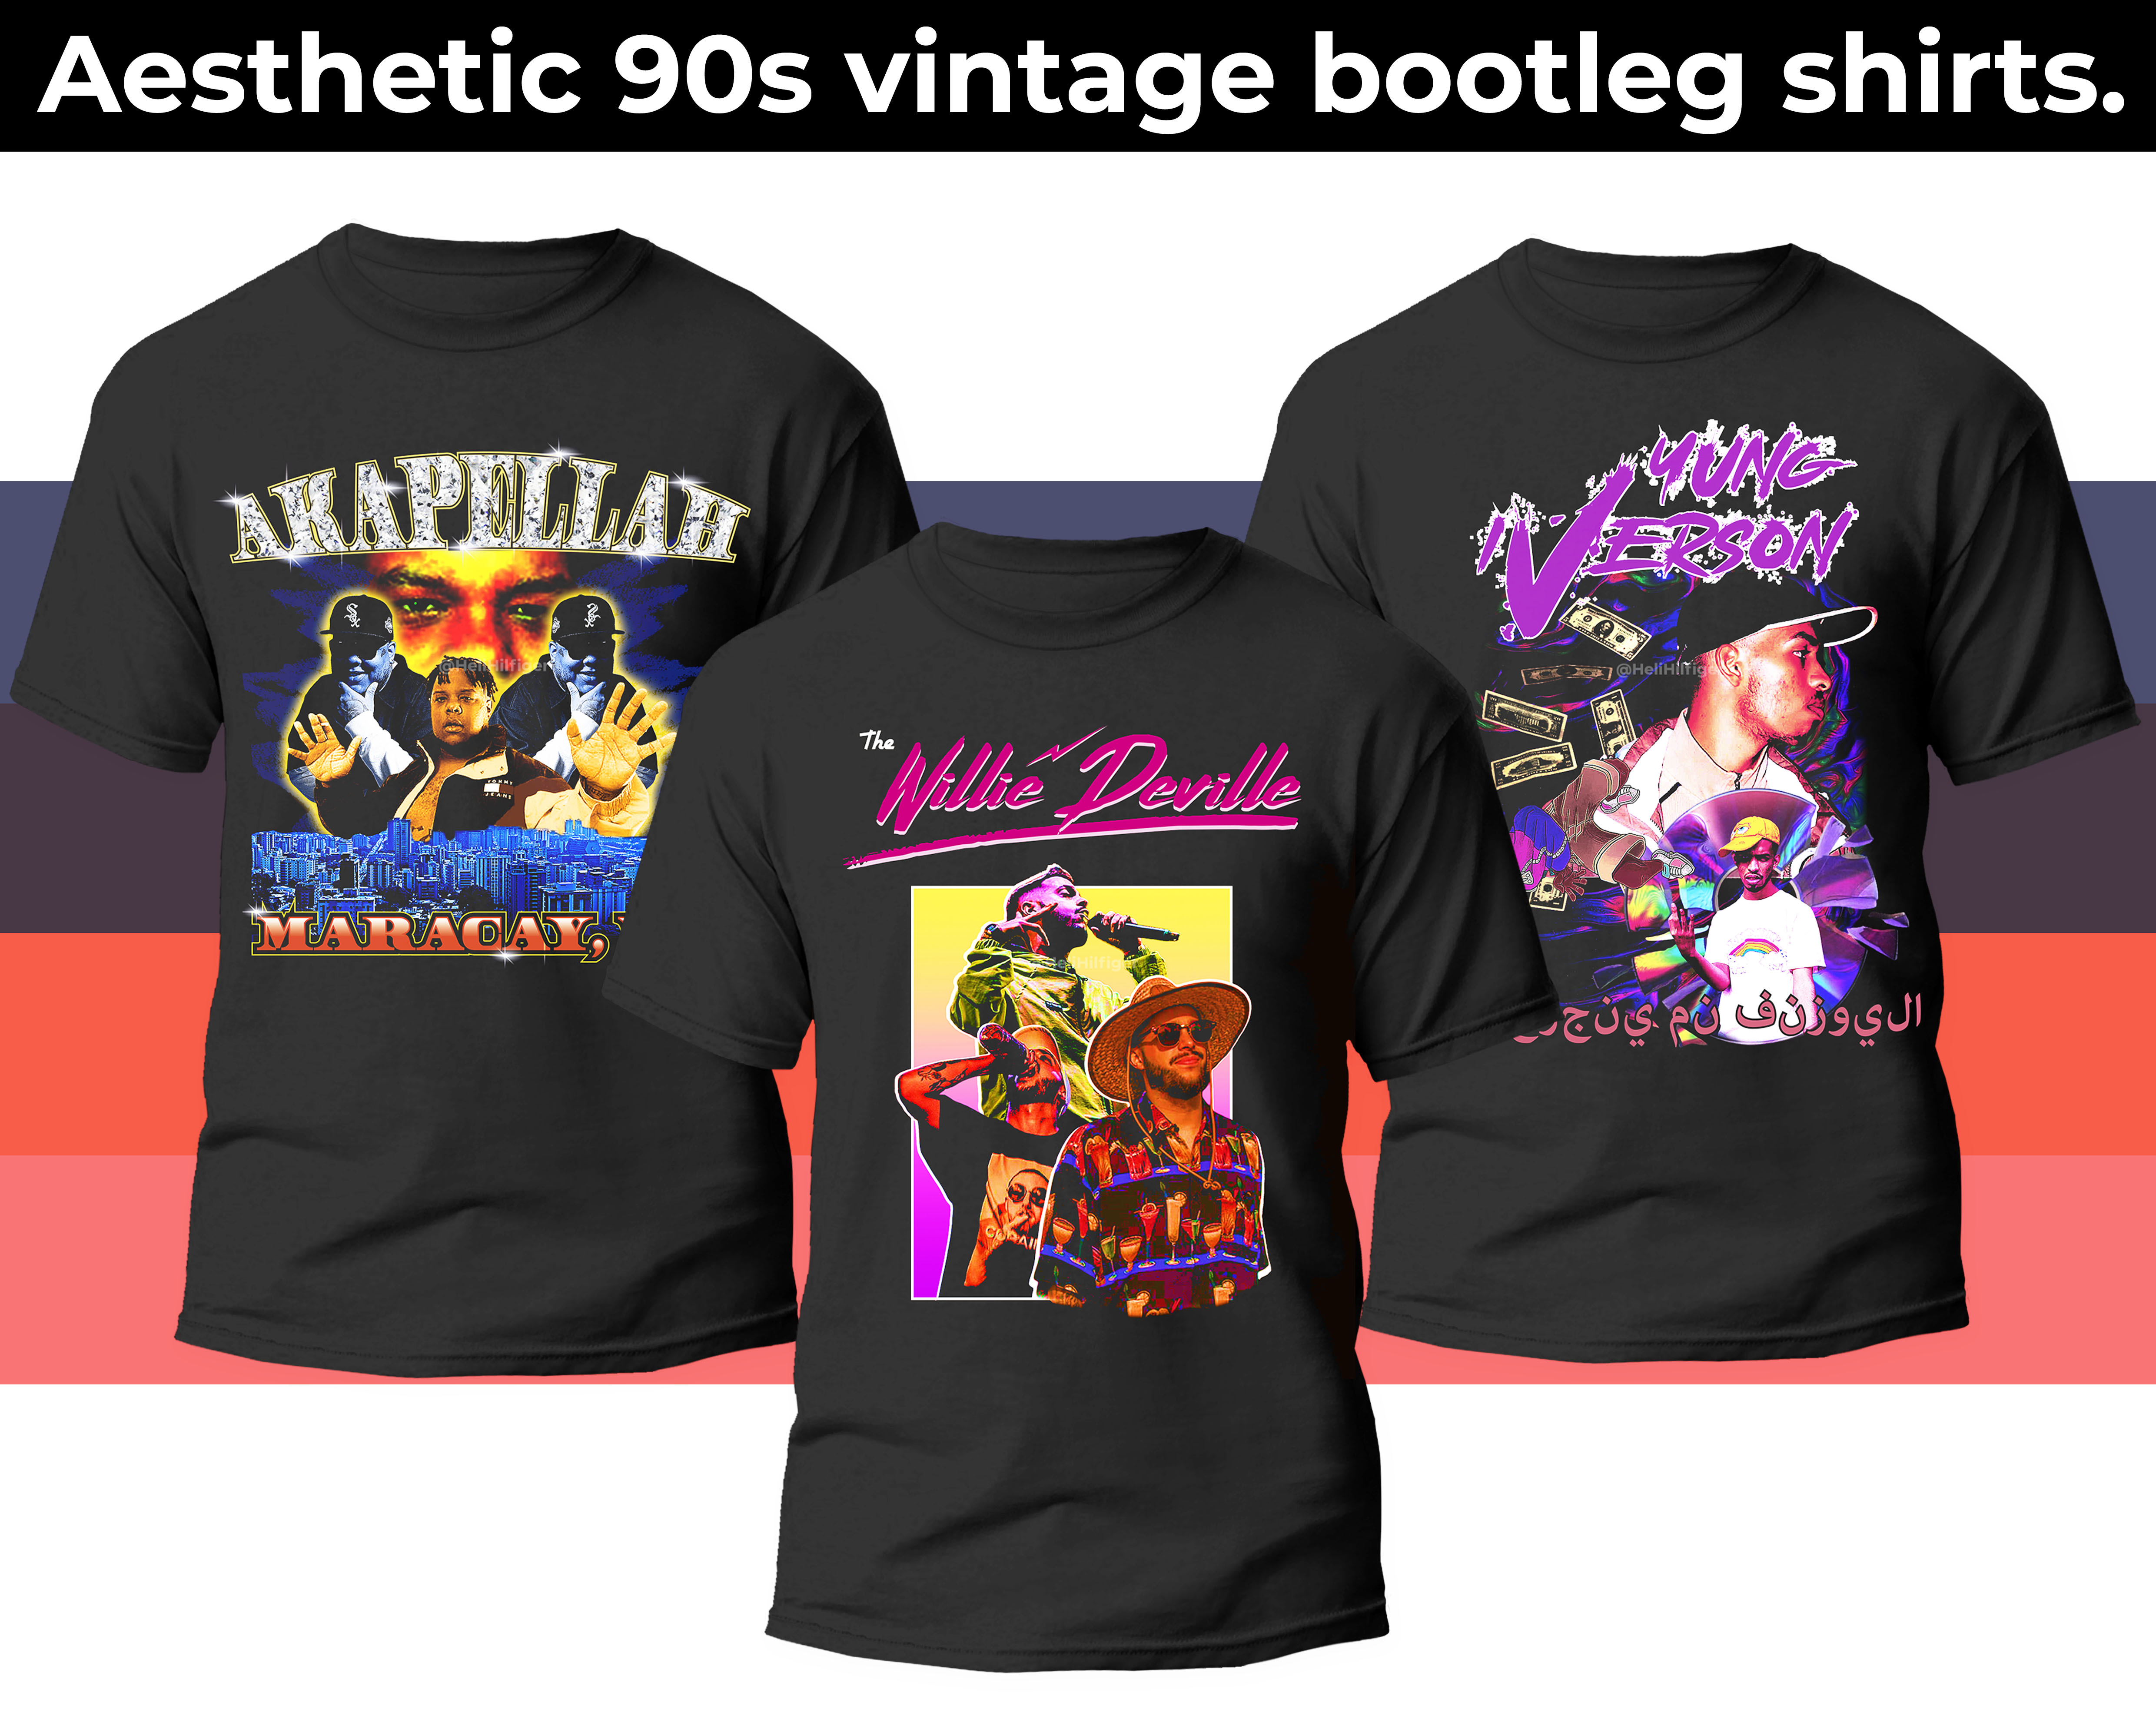 Design your favorite aesthetic 90s vintage bootleg shirt by